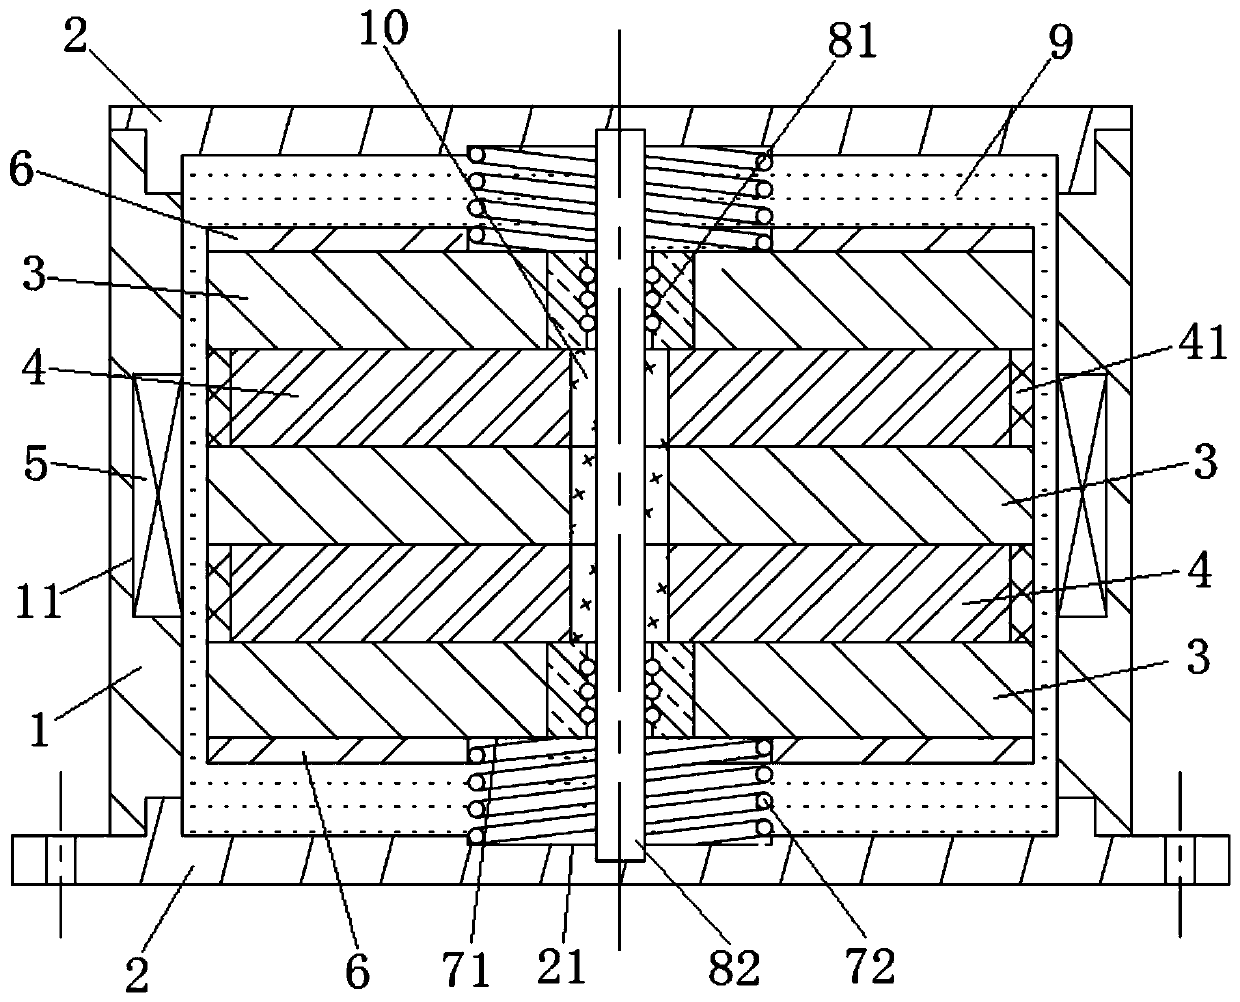 Modularized vibration absorber, vibration absorber module and machine tool